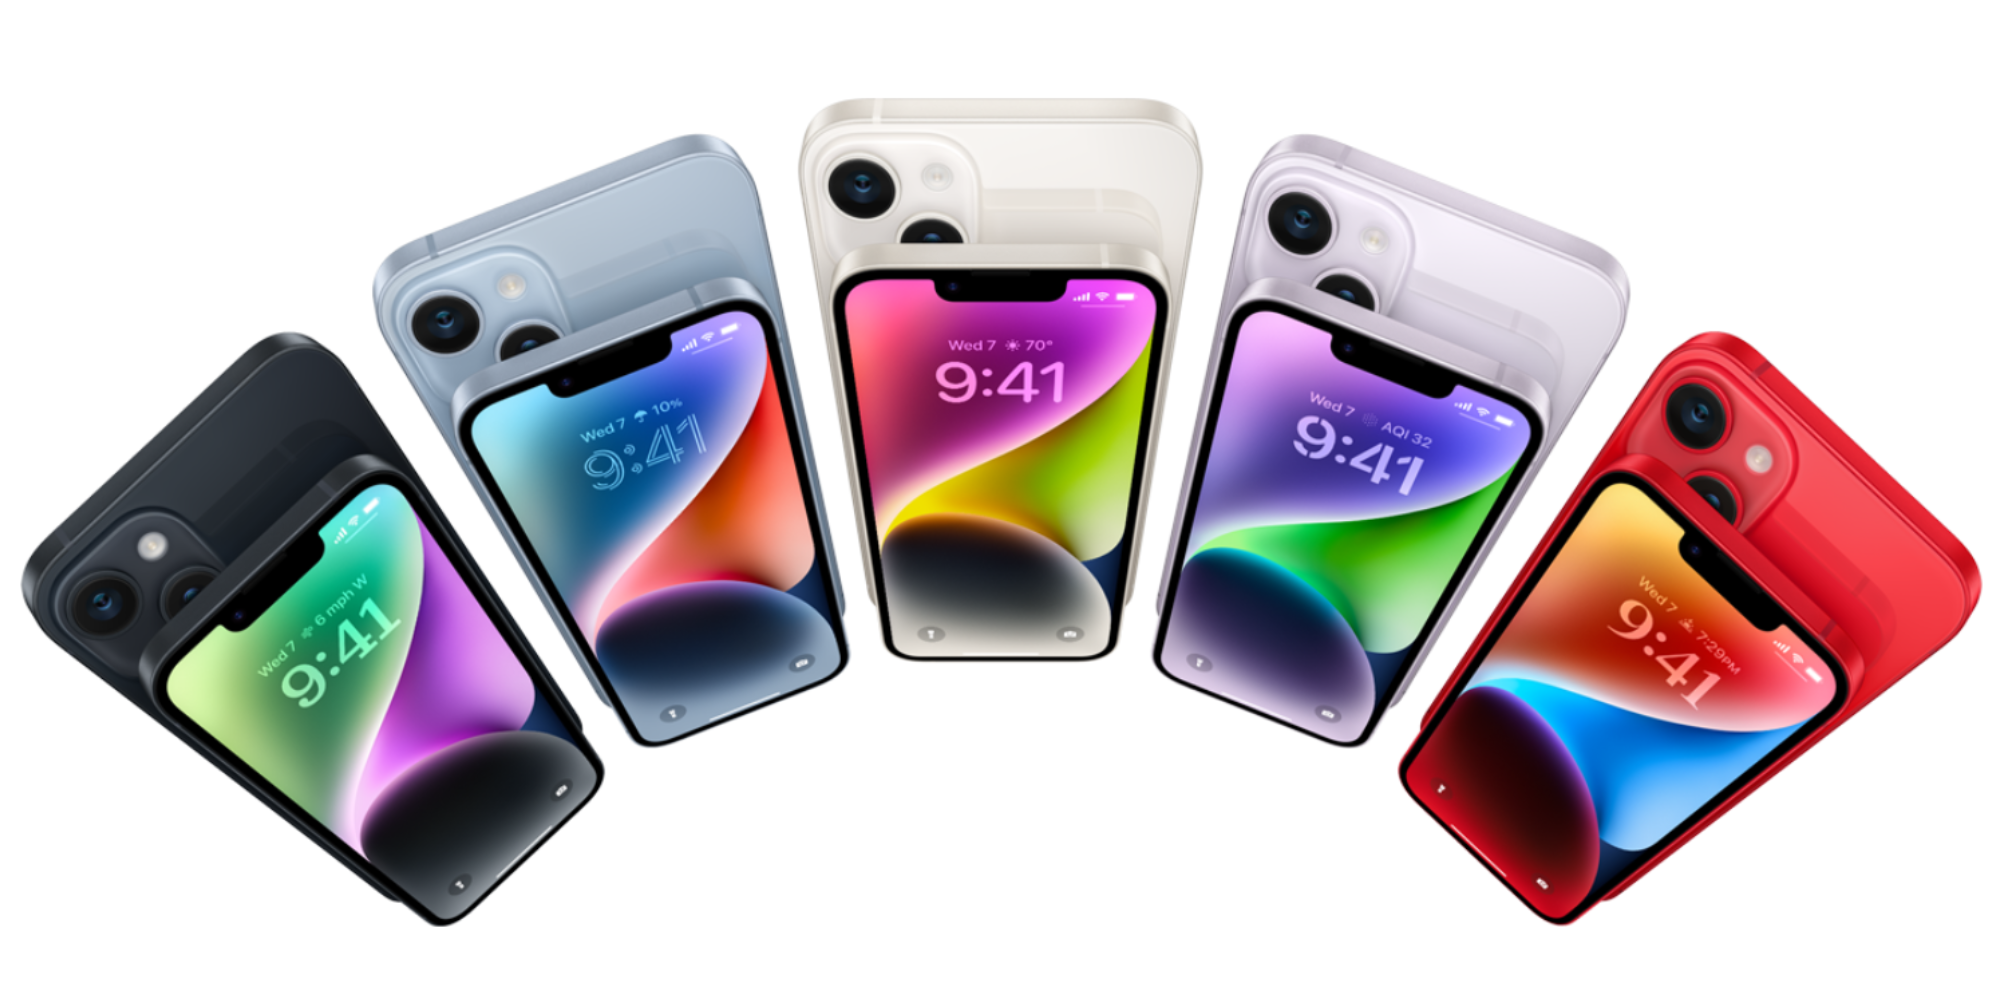 iPhone 14 color options